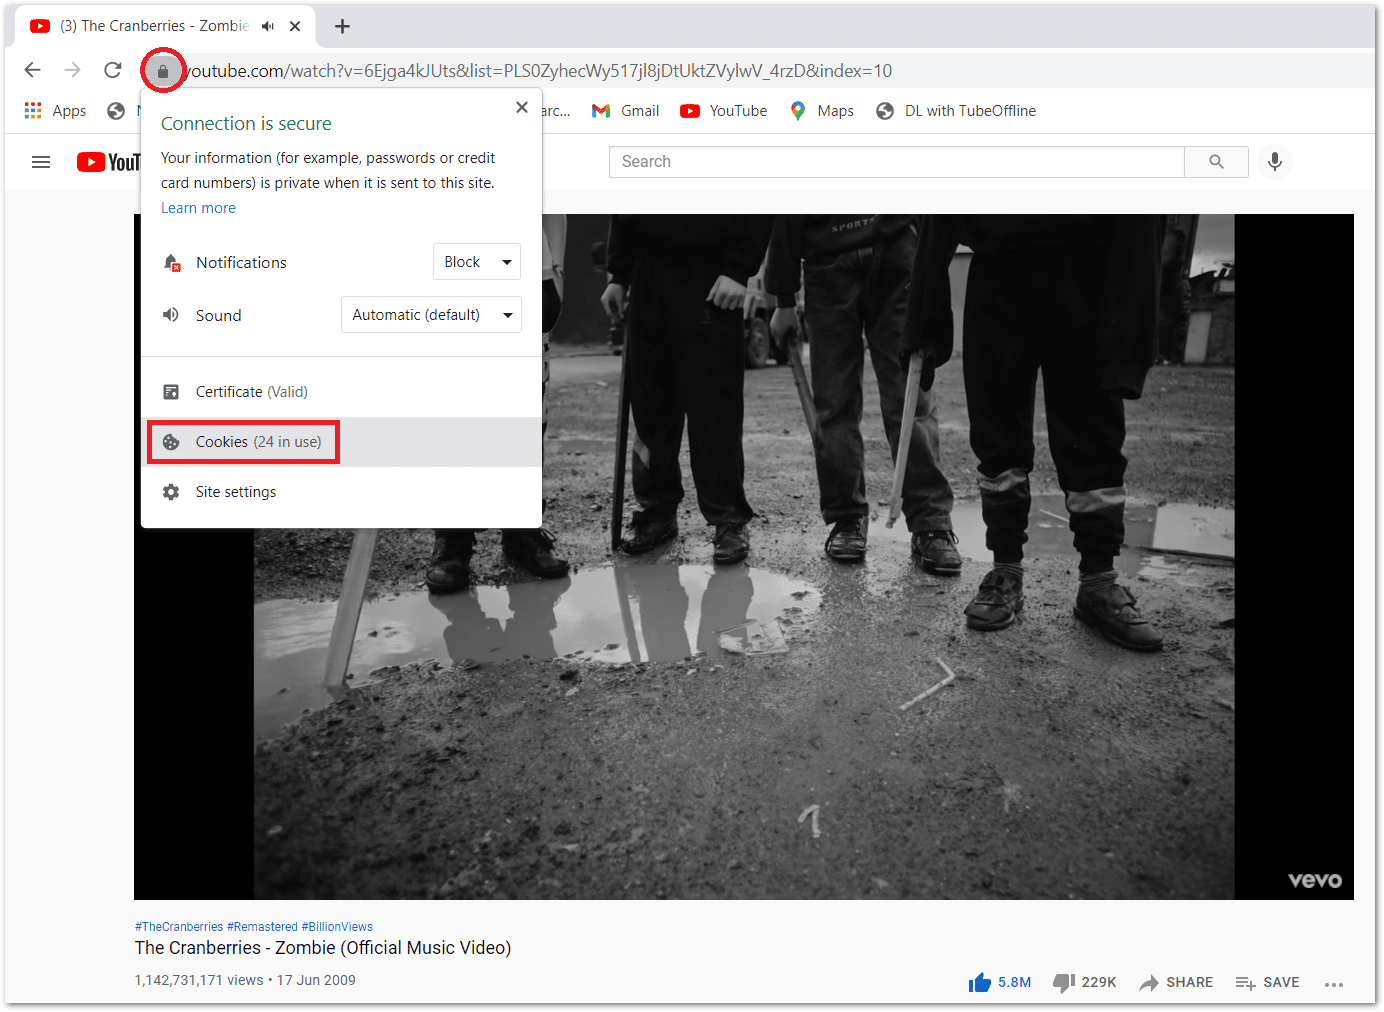 clear the YouTube website cache data and cookies on Google Chrome or Microsoft Edge on Windows to fix YouTube search bar and filters not working or showing results